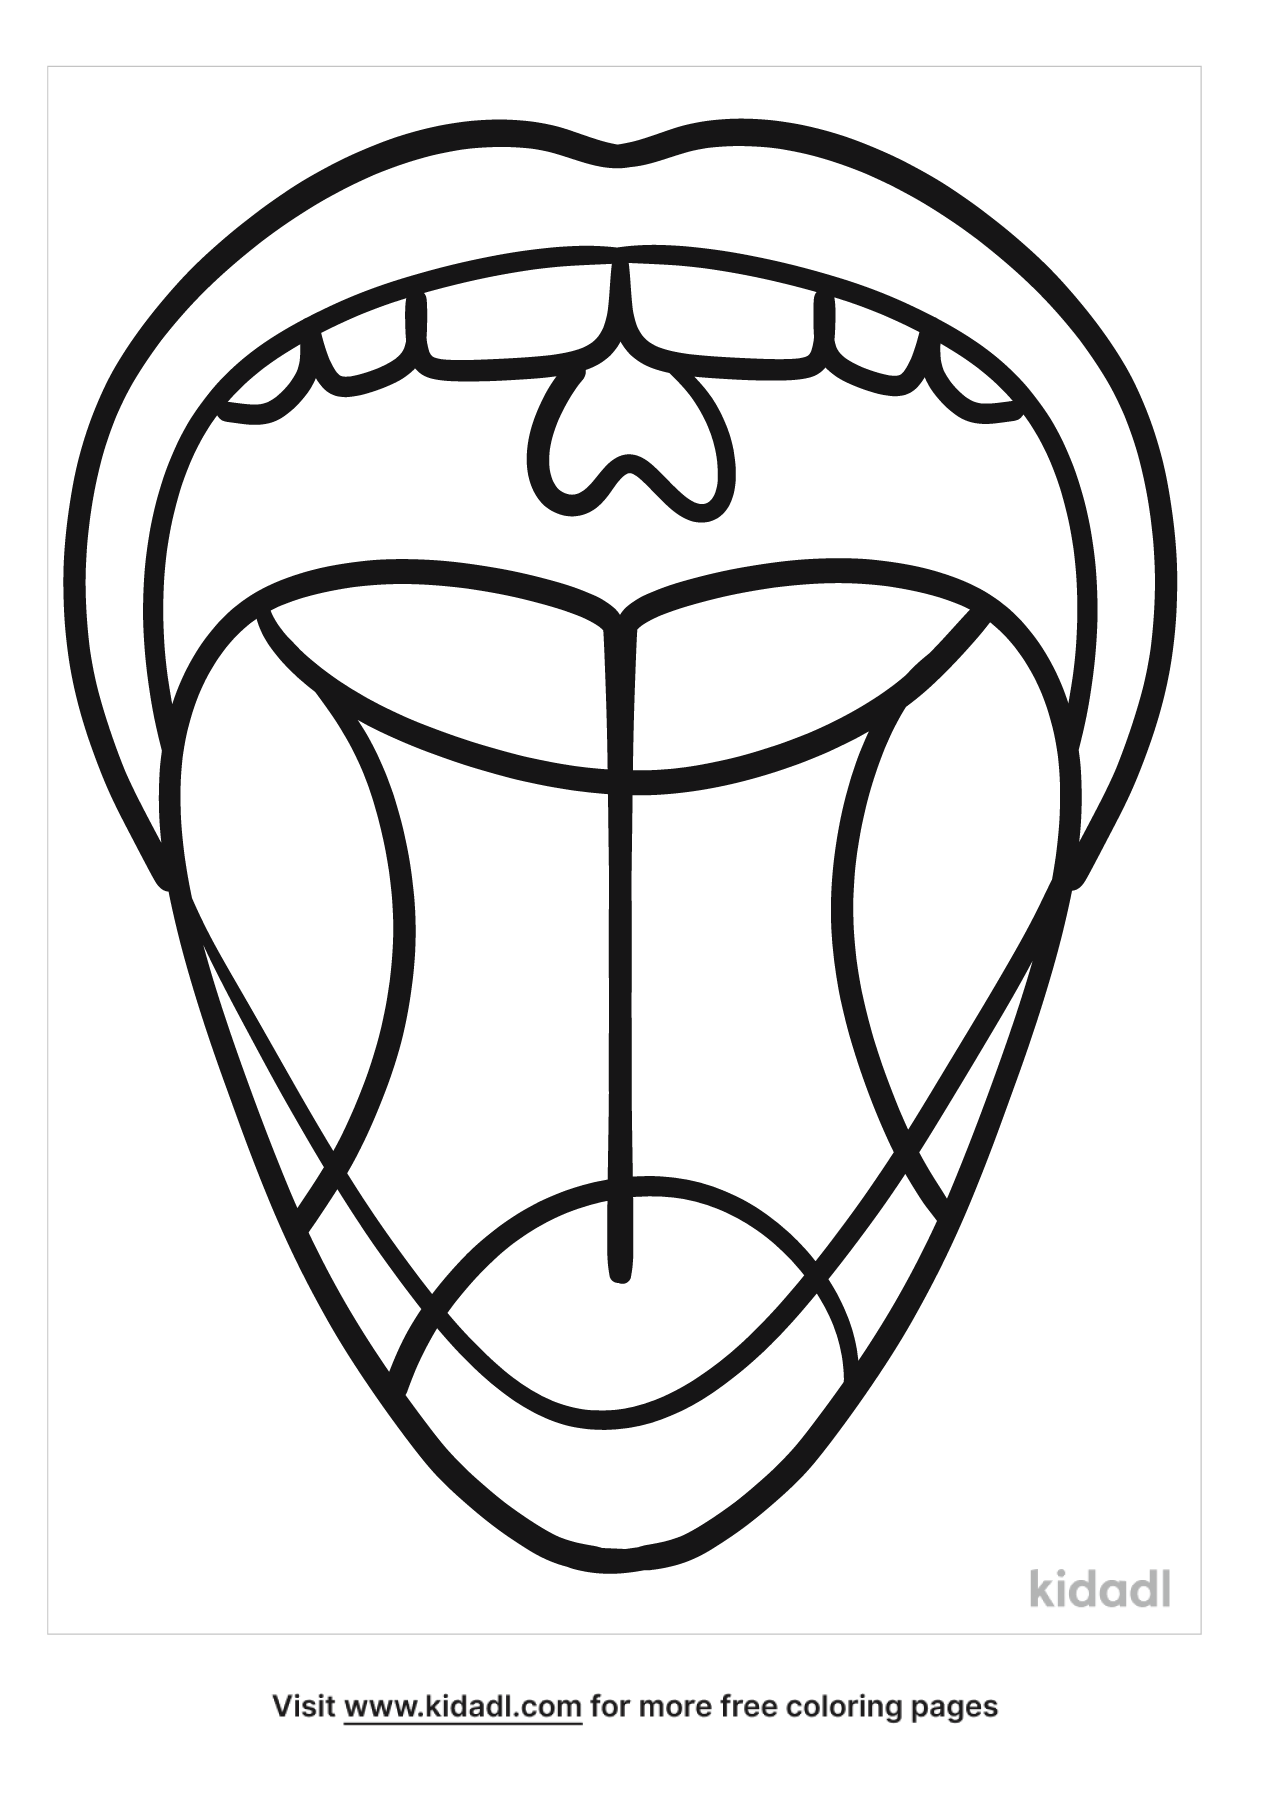 Lips With Tongue Coloring Pages | Free Human-body Coloring Pages | Kidadl